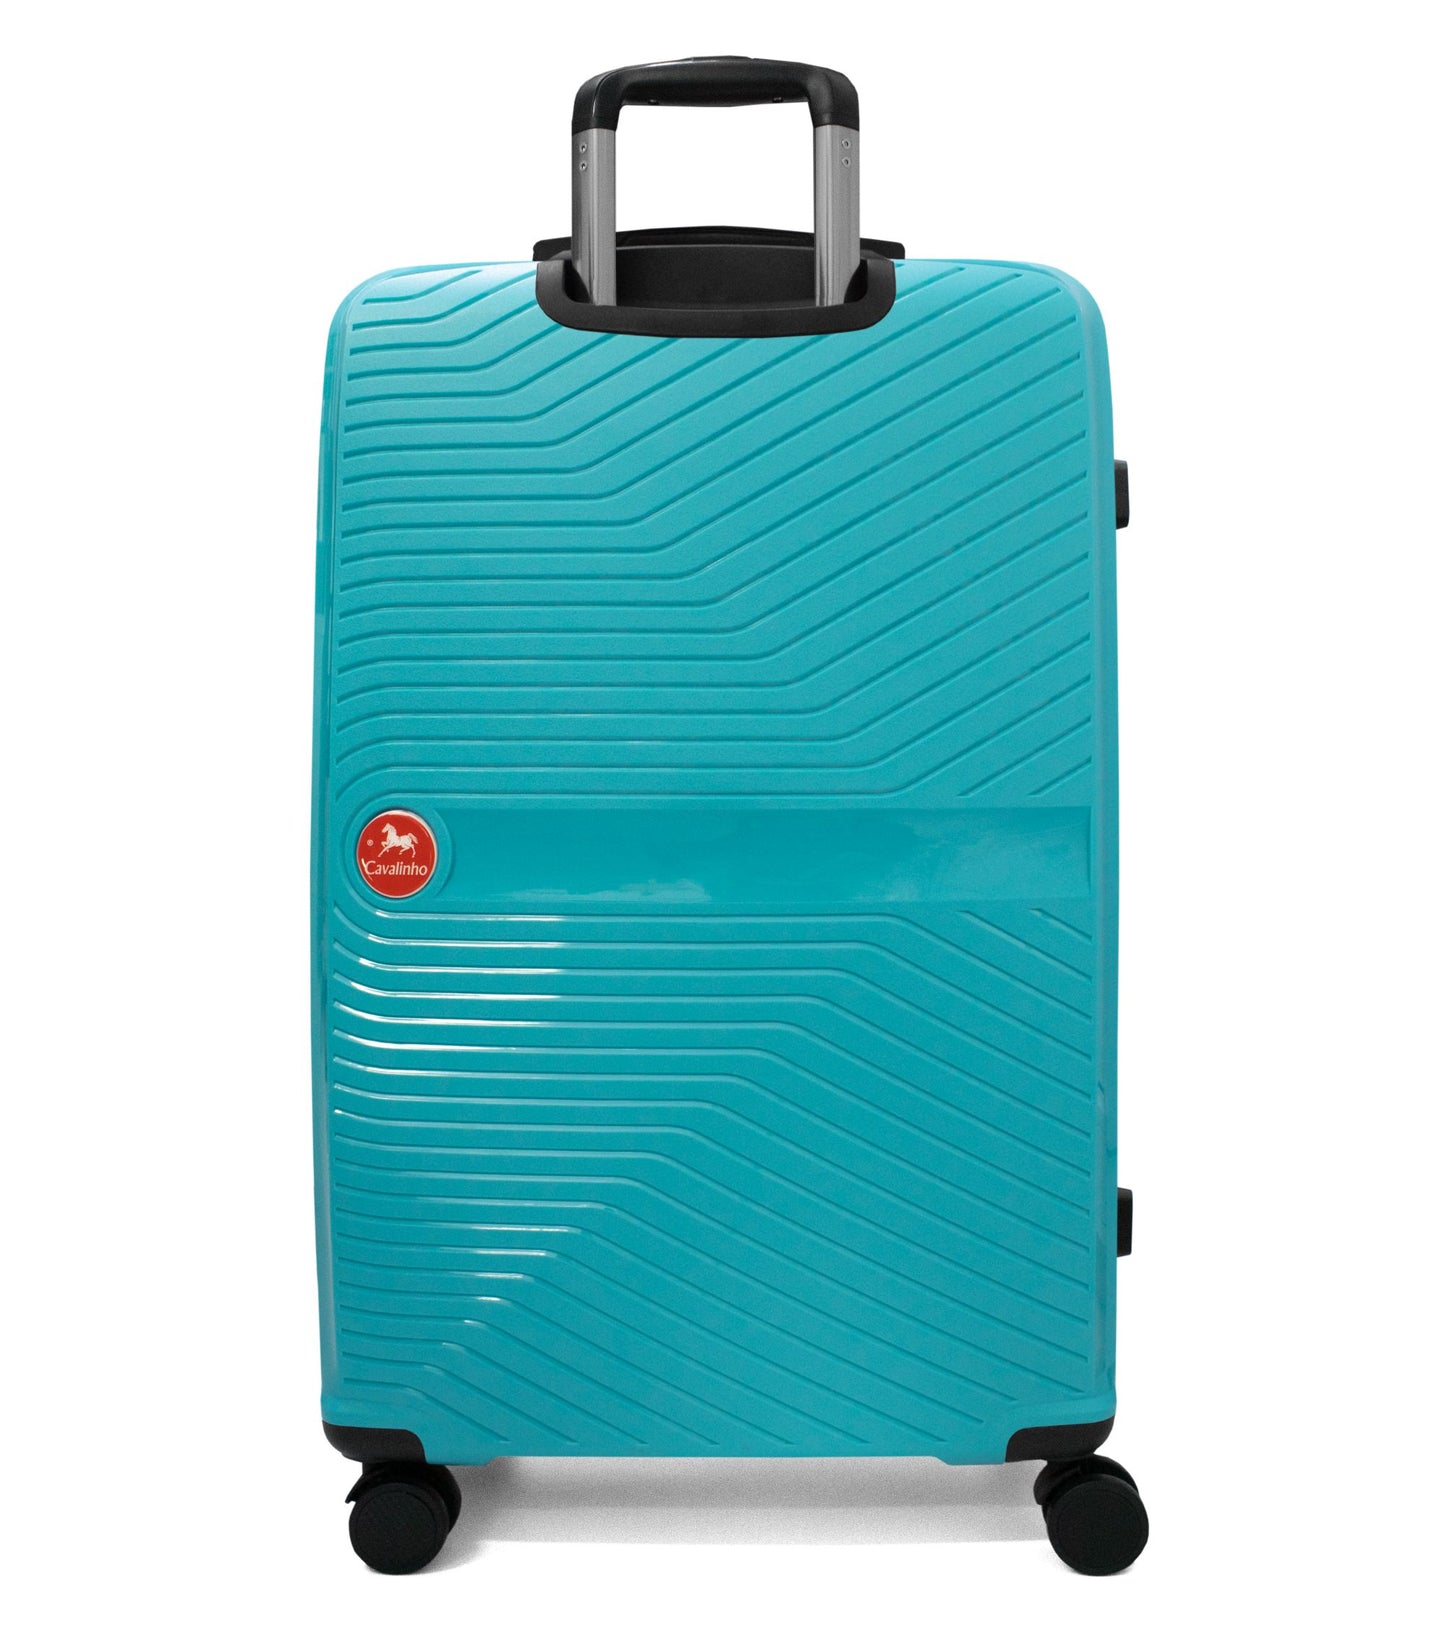 Cavalinho Colorful Check-in Hardside Luggage (28") - 28 inch DarkTurquoise - 68020004.25.28_3